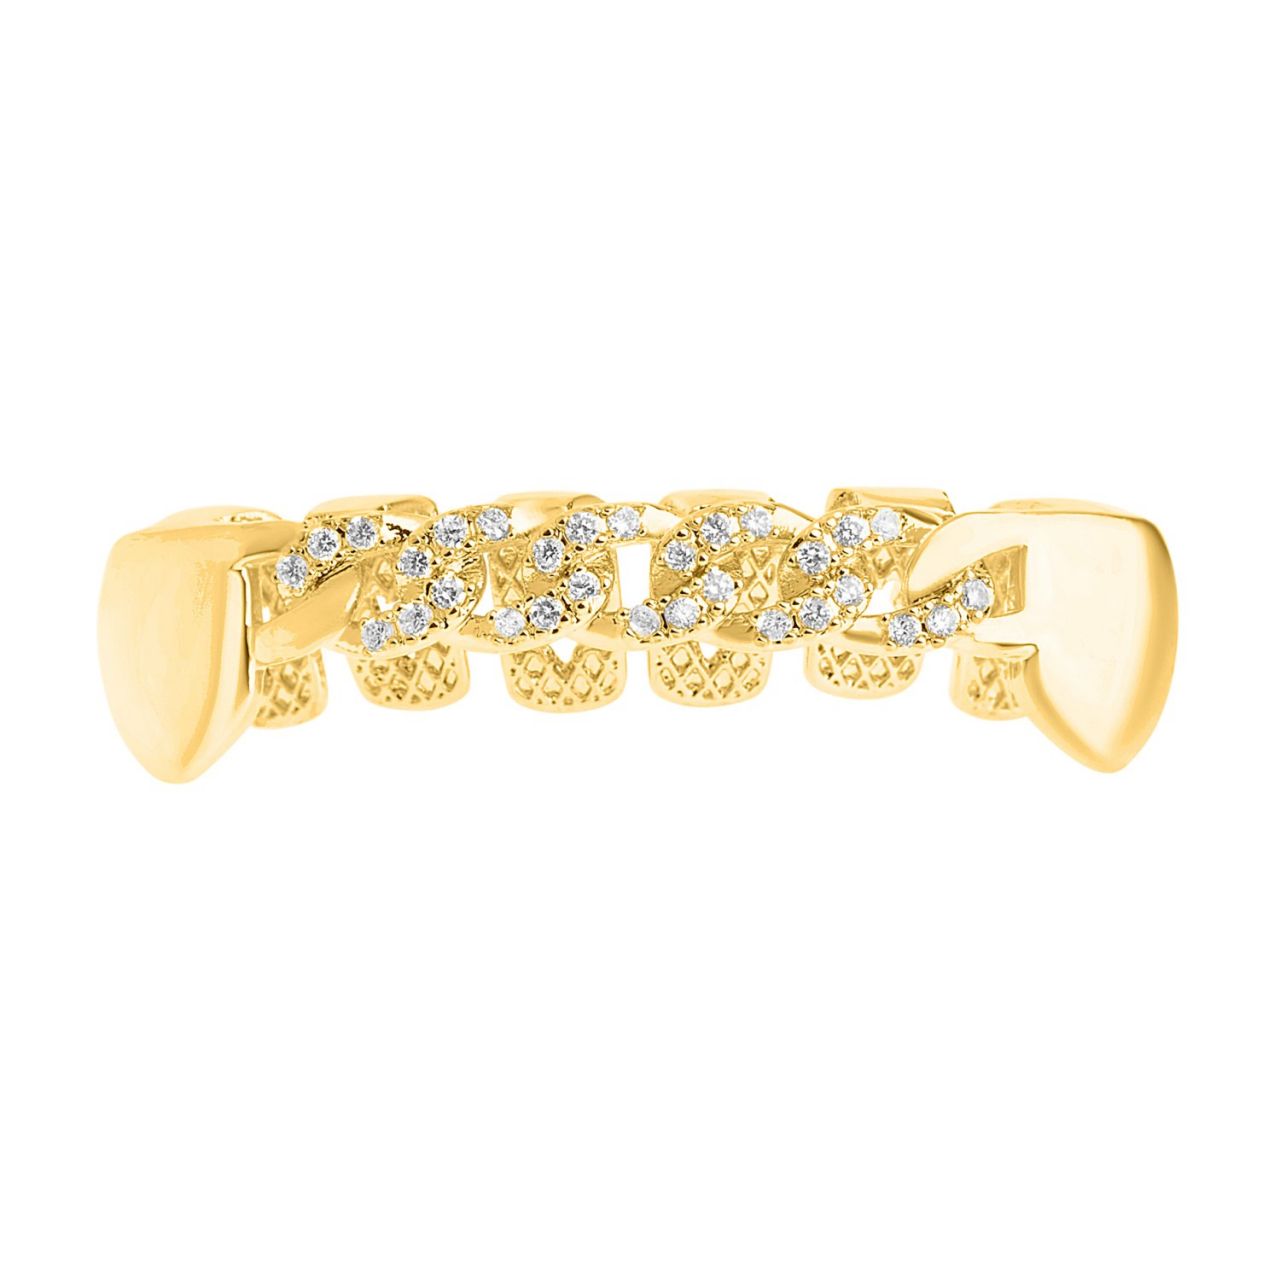 One size fits all Bottom Grillz – Zirkonia Curb Kette gold